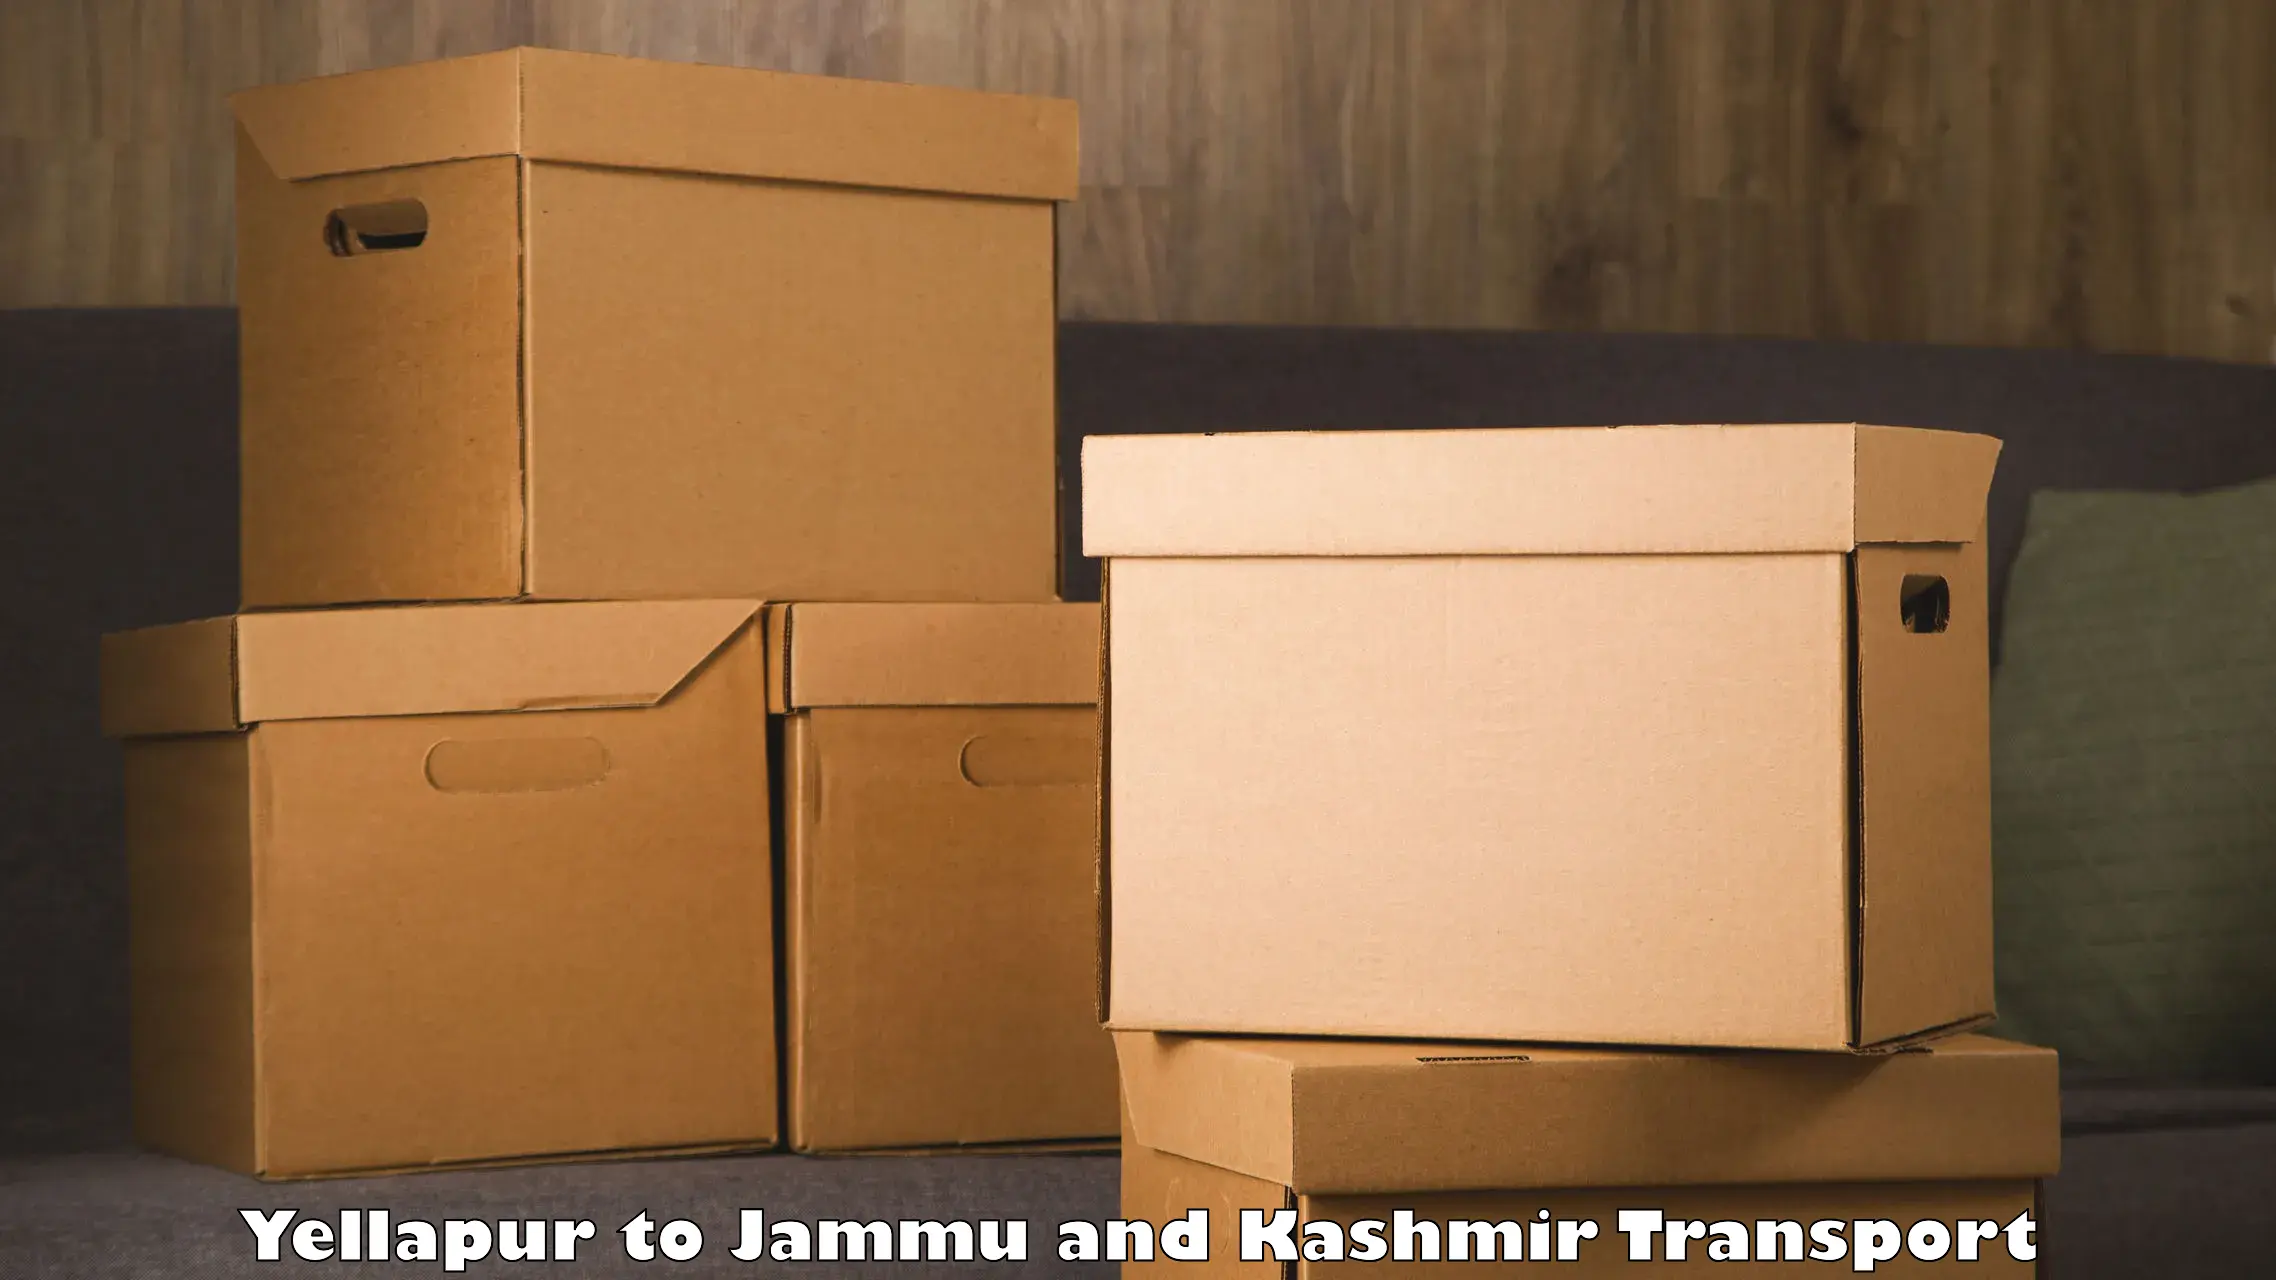 Daily parcel service transport in Yellapur to Anantnag